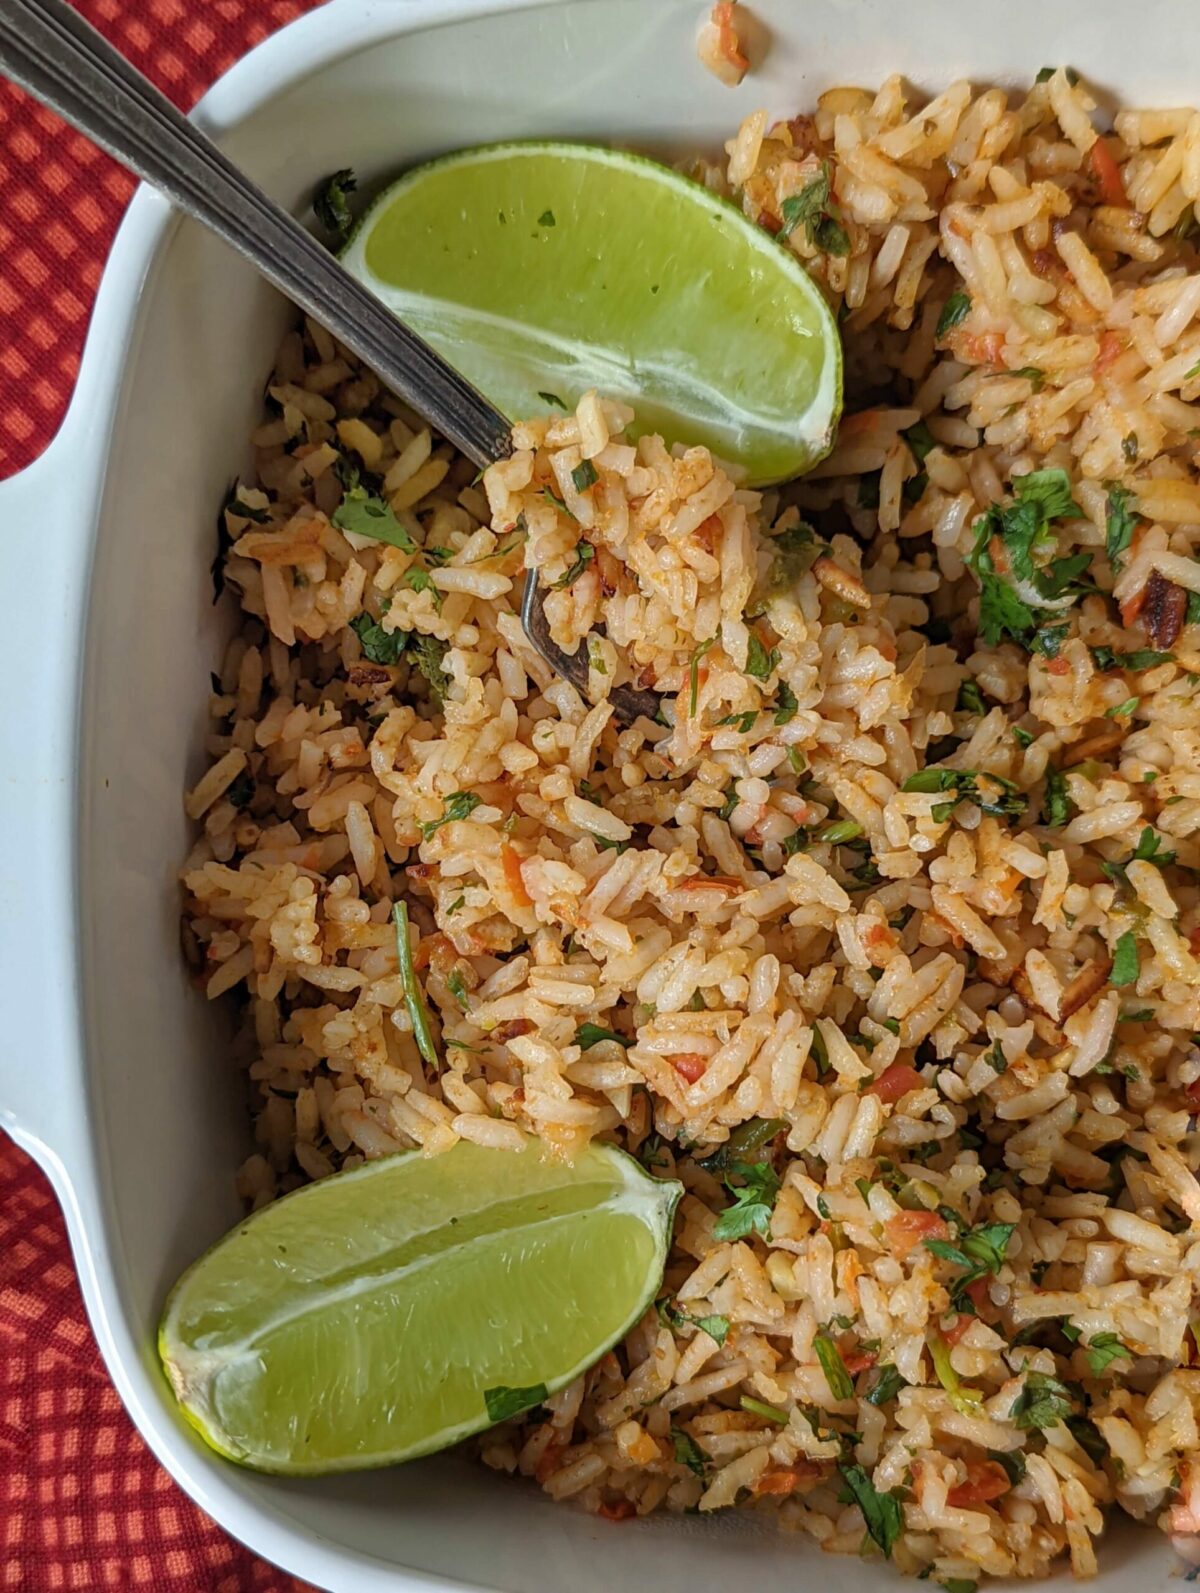 Vegan Mexican rice in a serving dish with lime wedges.